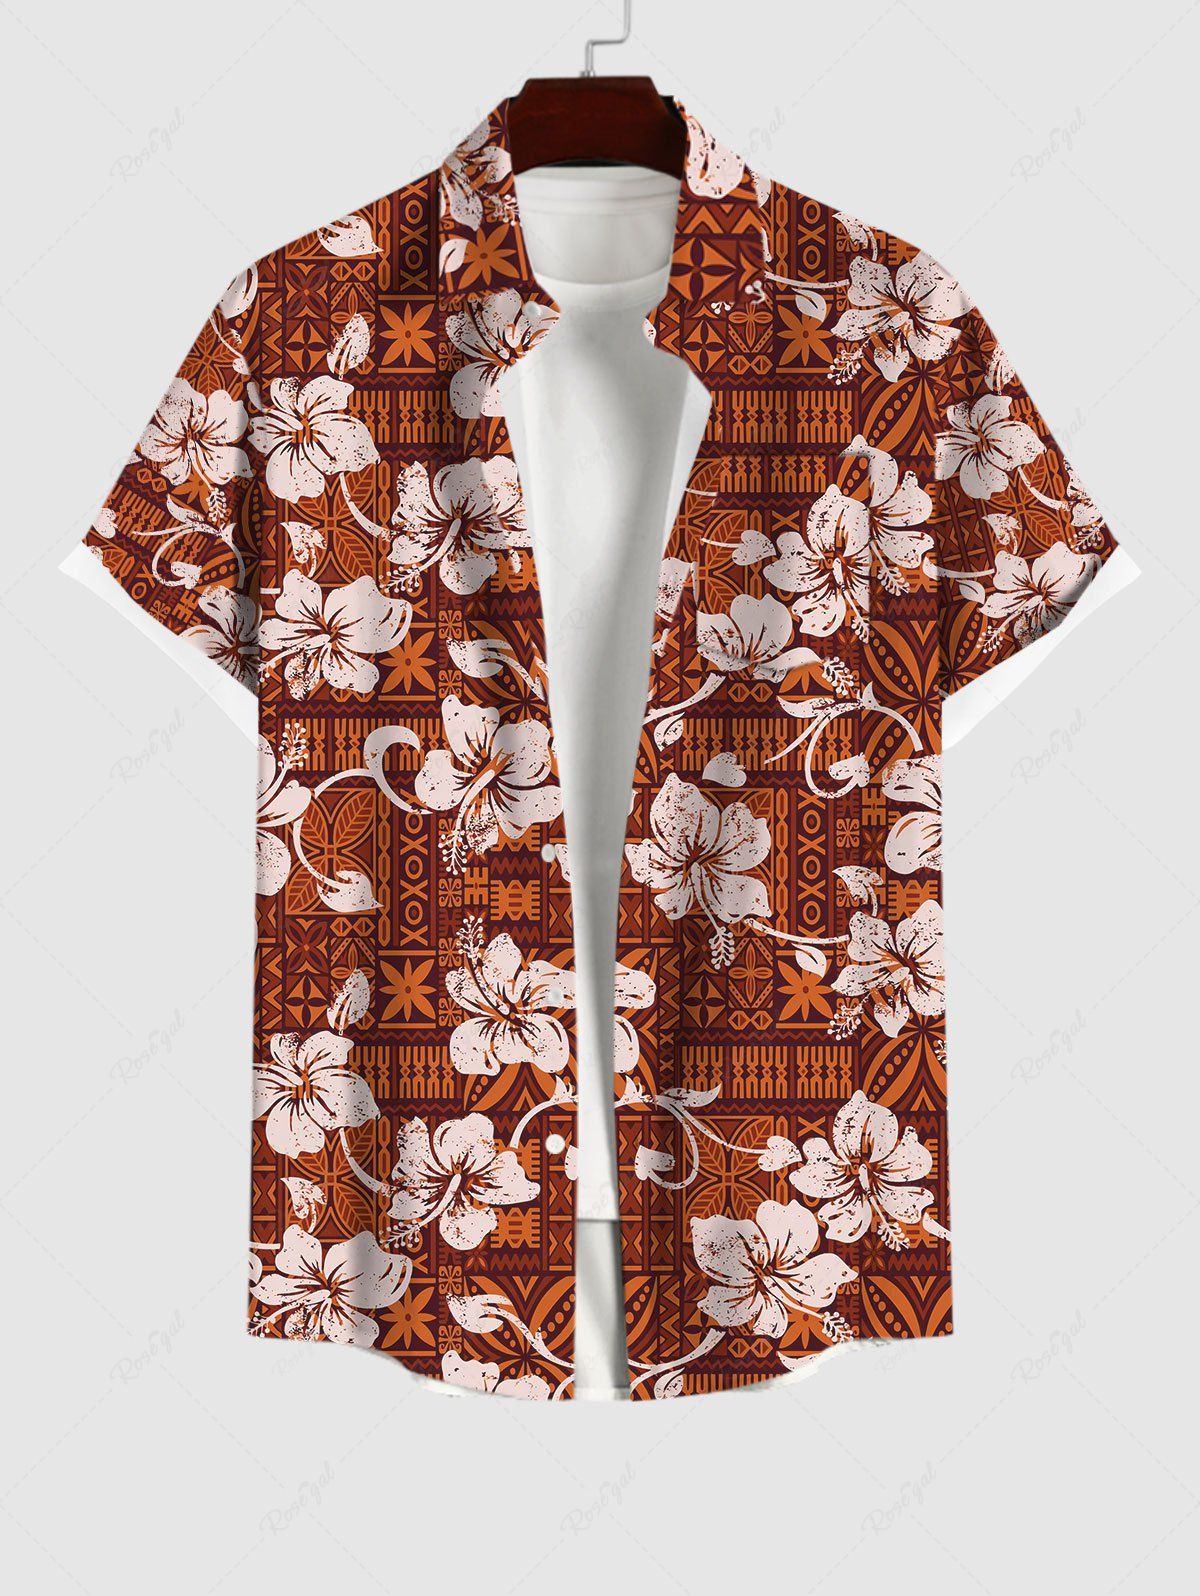 New Hawaii Plus Size Turn-down Collar Vintage Floral Patternblock Graphic Print Button Pocket Shirt For Men  